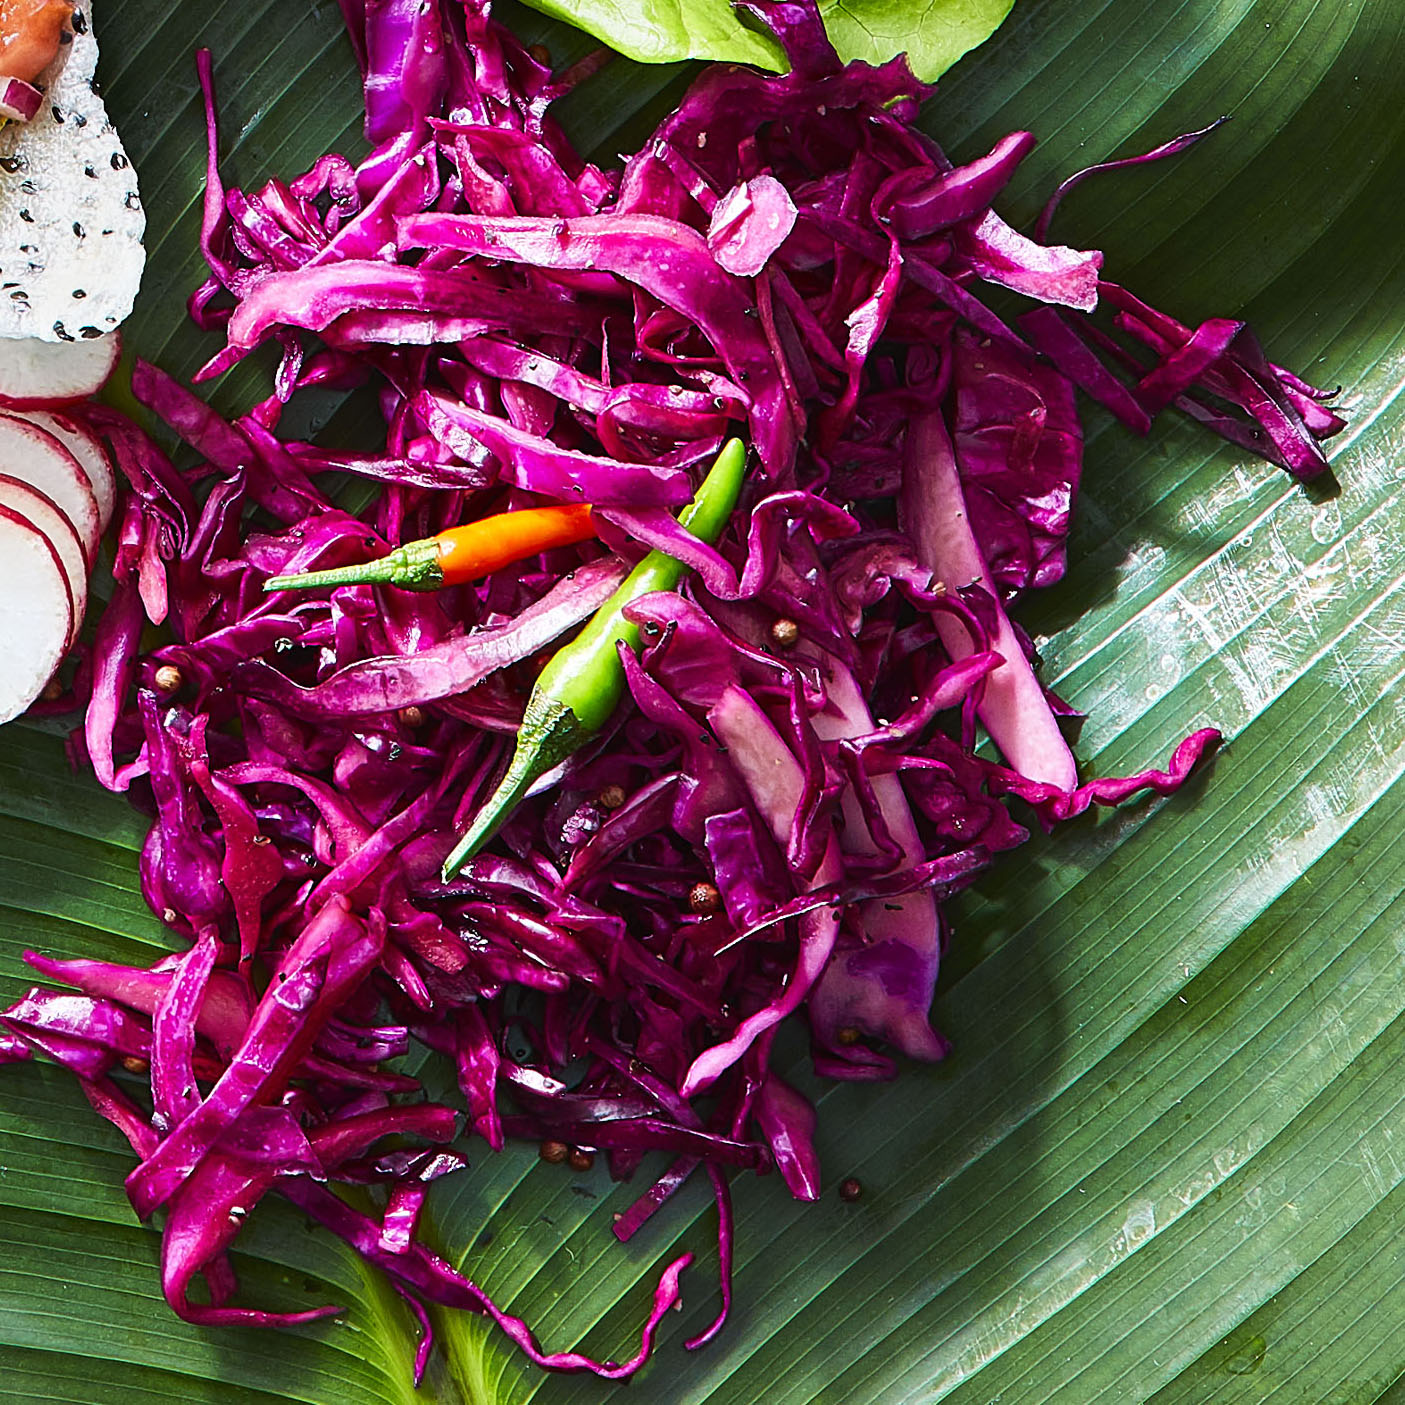 Quick-Pickled Red Cabbage (Atchara)